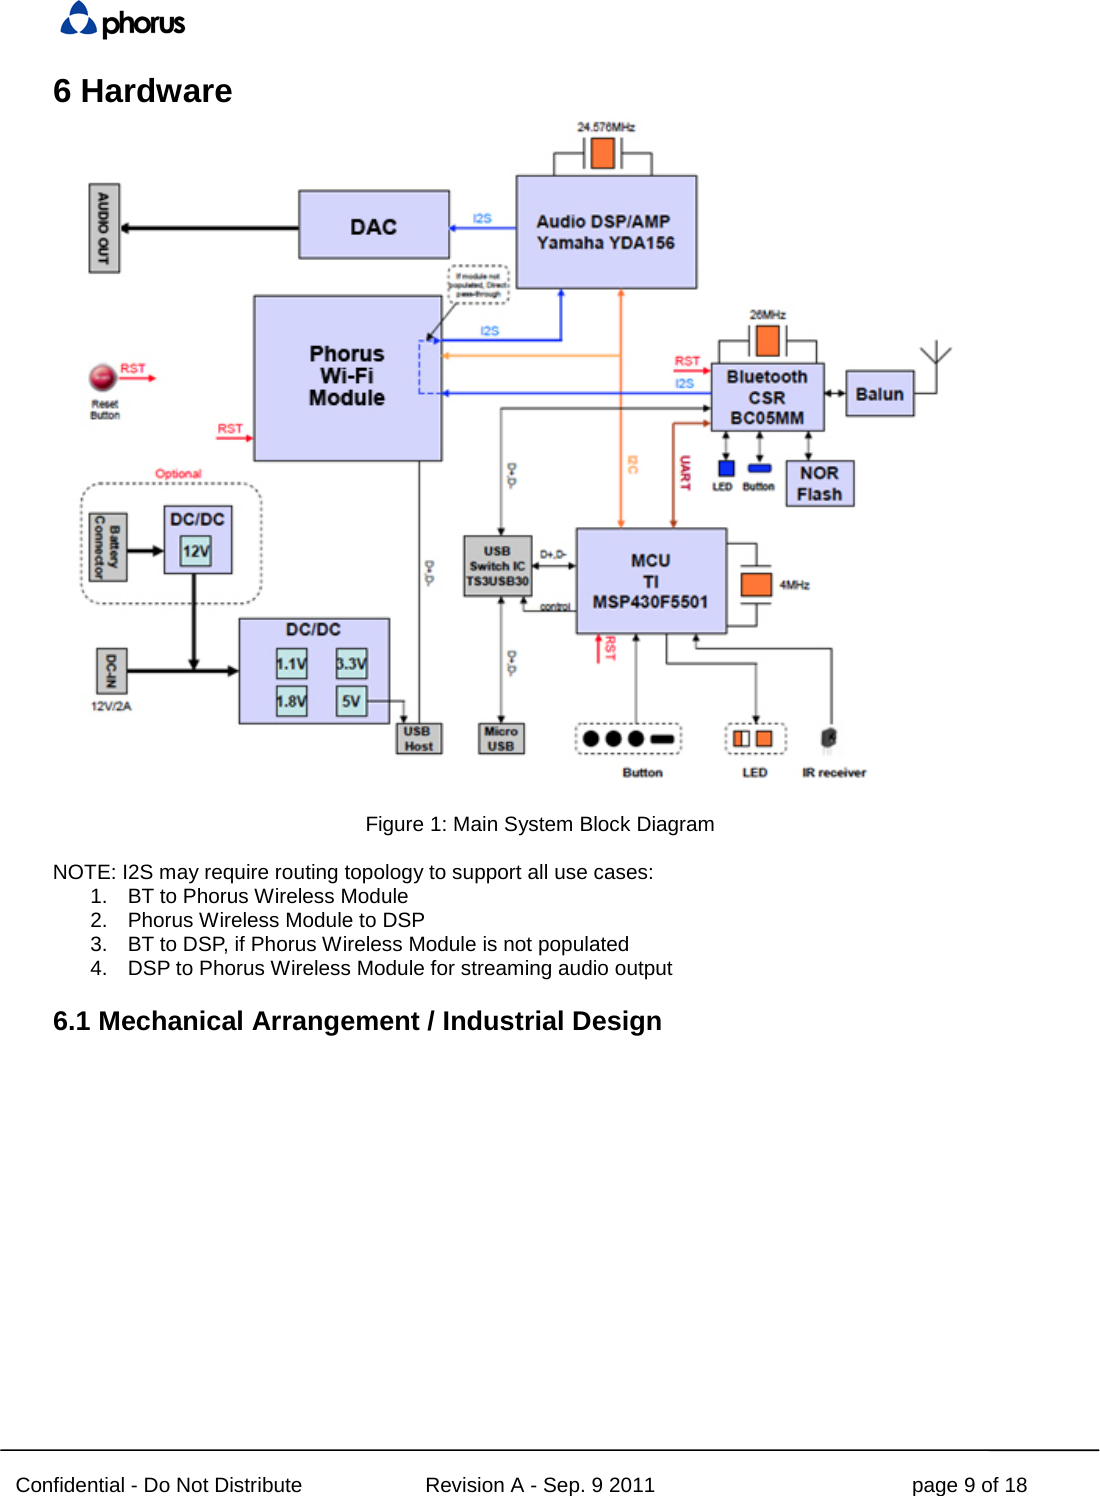  Confidential - Do Not Distribute Revision A - Sep. 9 2011 page 9 of 18 6 Hardware   Figure 1: Main System Block Diagram  NOTE: I2S may require routing topology to support all use cases: 1. BT to Phorus Wireless Module 2. Phorus Wireless Module to DSP 3. BT to DSP, if Phorus Wireless Module is not populated 4. DSP to Phorus Wireless Module for streaming audio output 6.1 Mechanical Arrangement / Industrial Design  